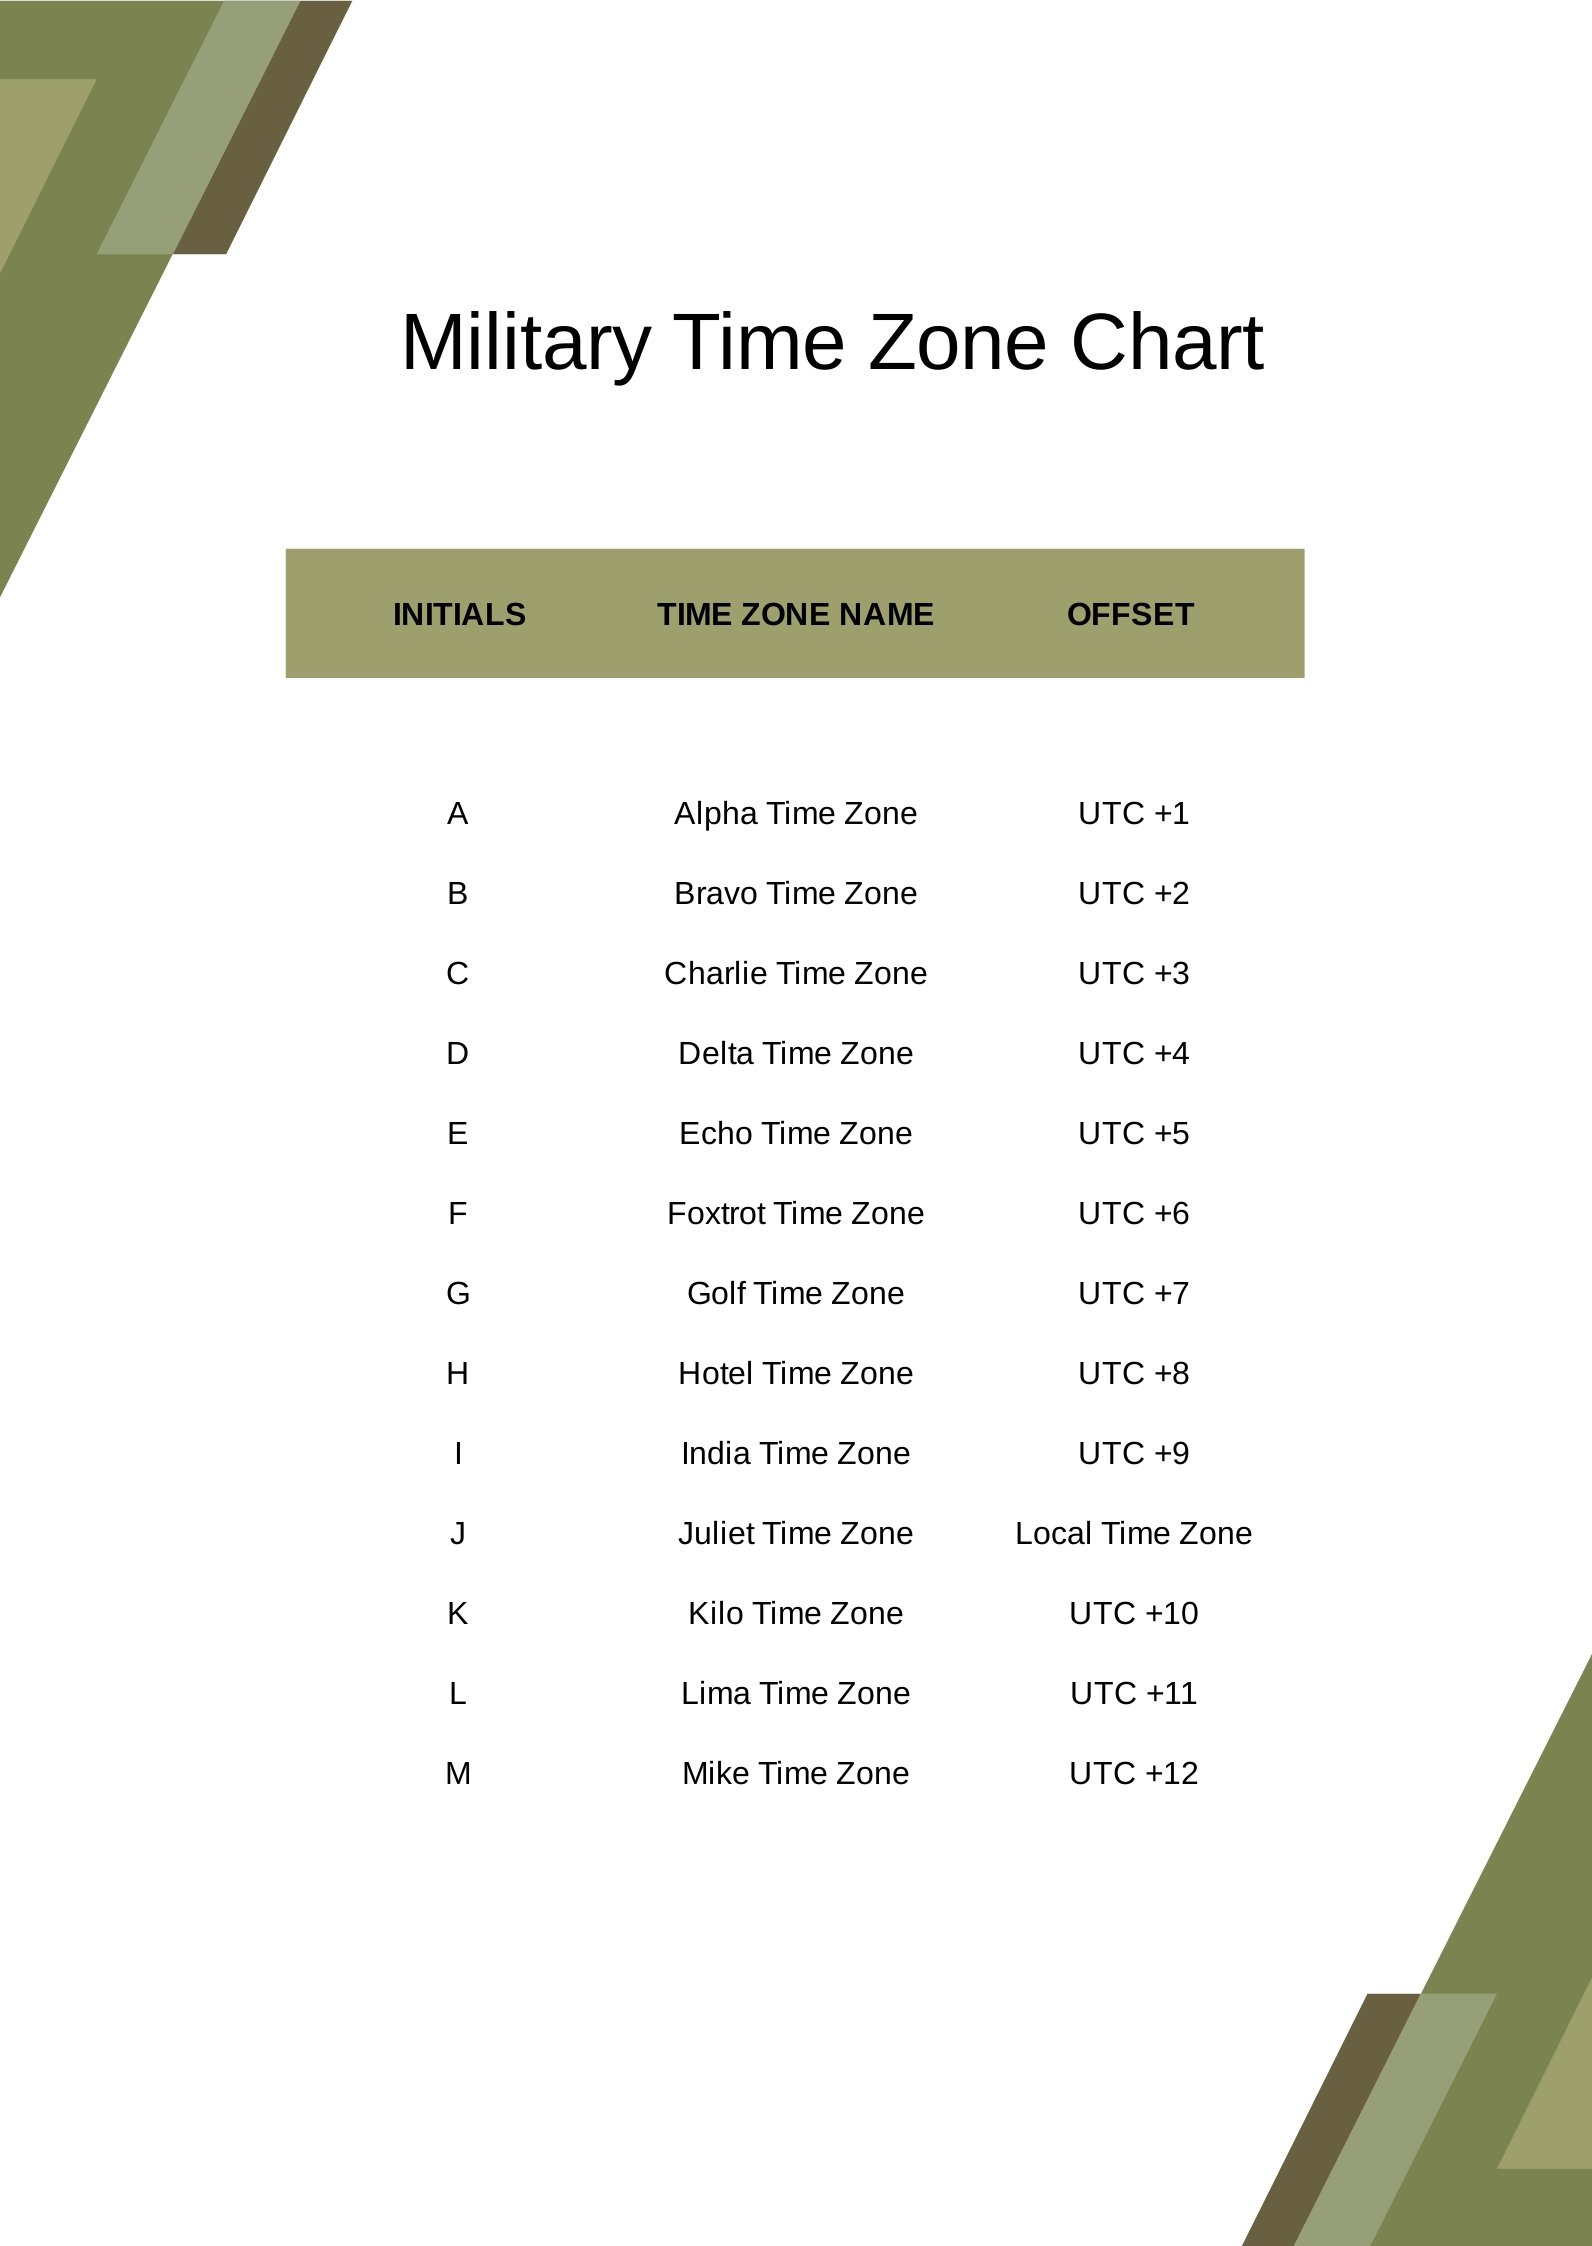 Military Time Zone Chart in PDF